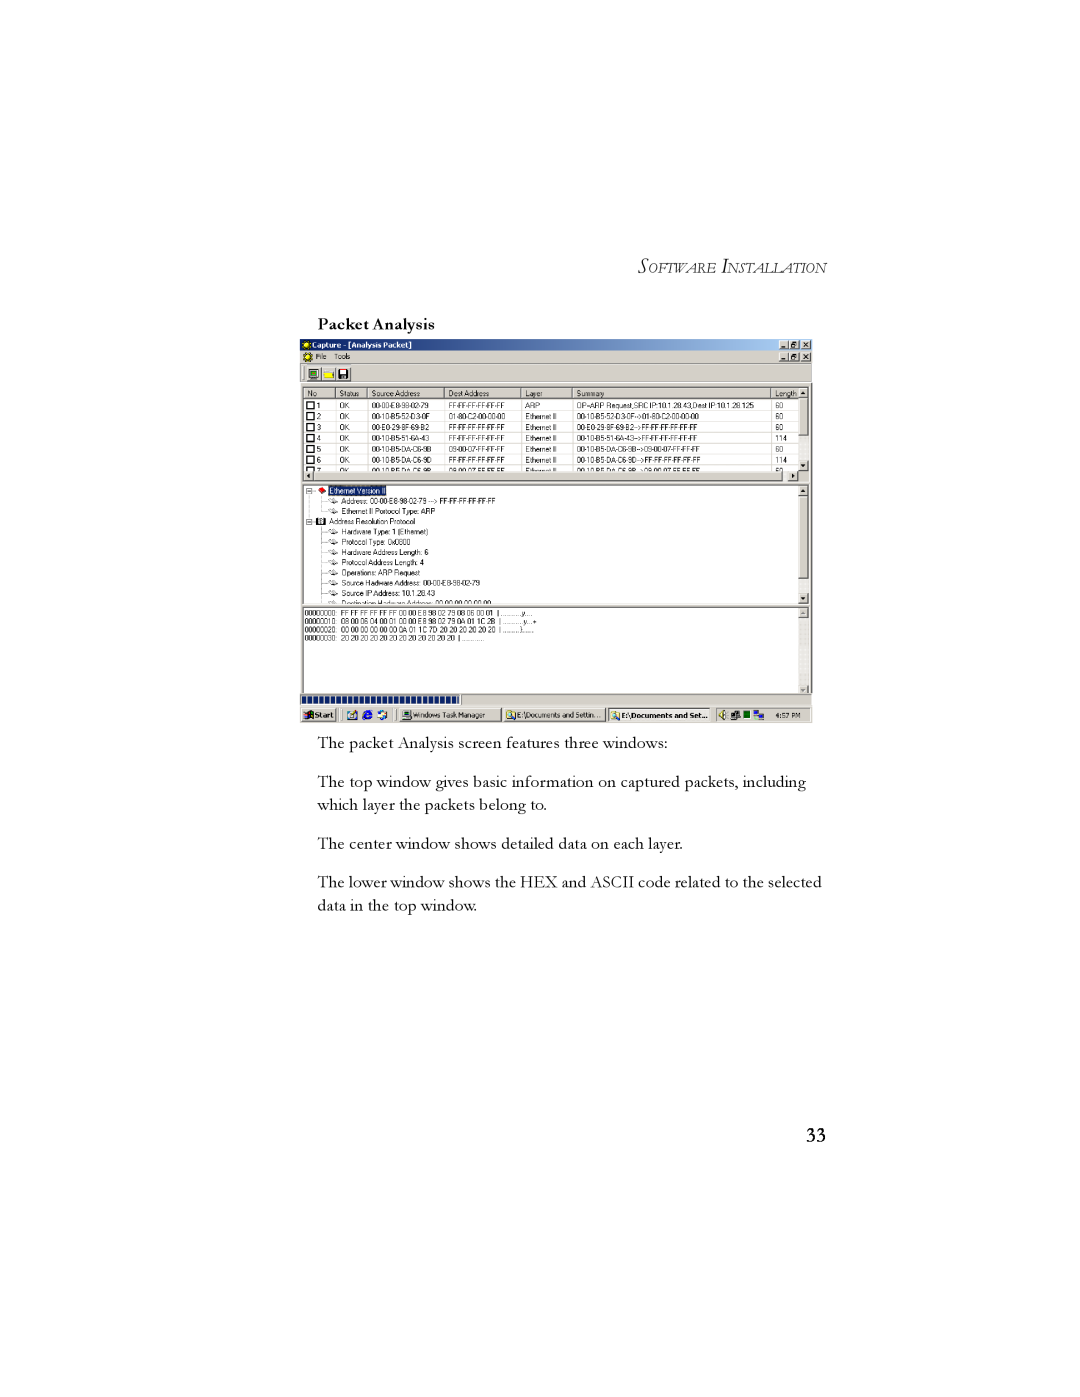 SMC Networks 10/100 Mbps manual Packet Analysis, The packet Analysis screen features three windows, Software Installation 